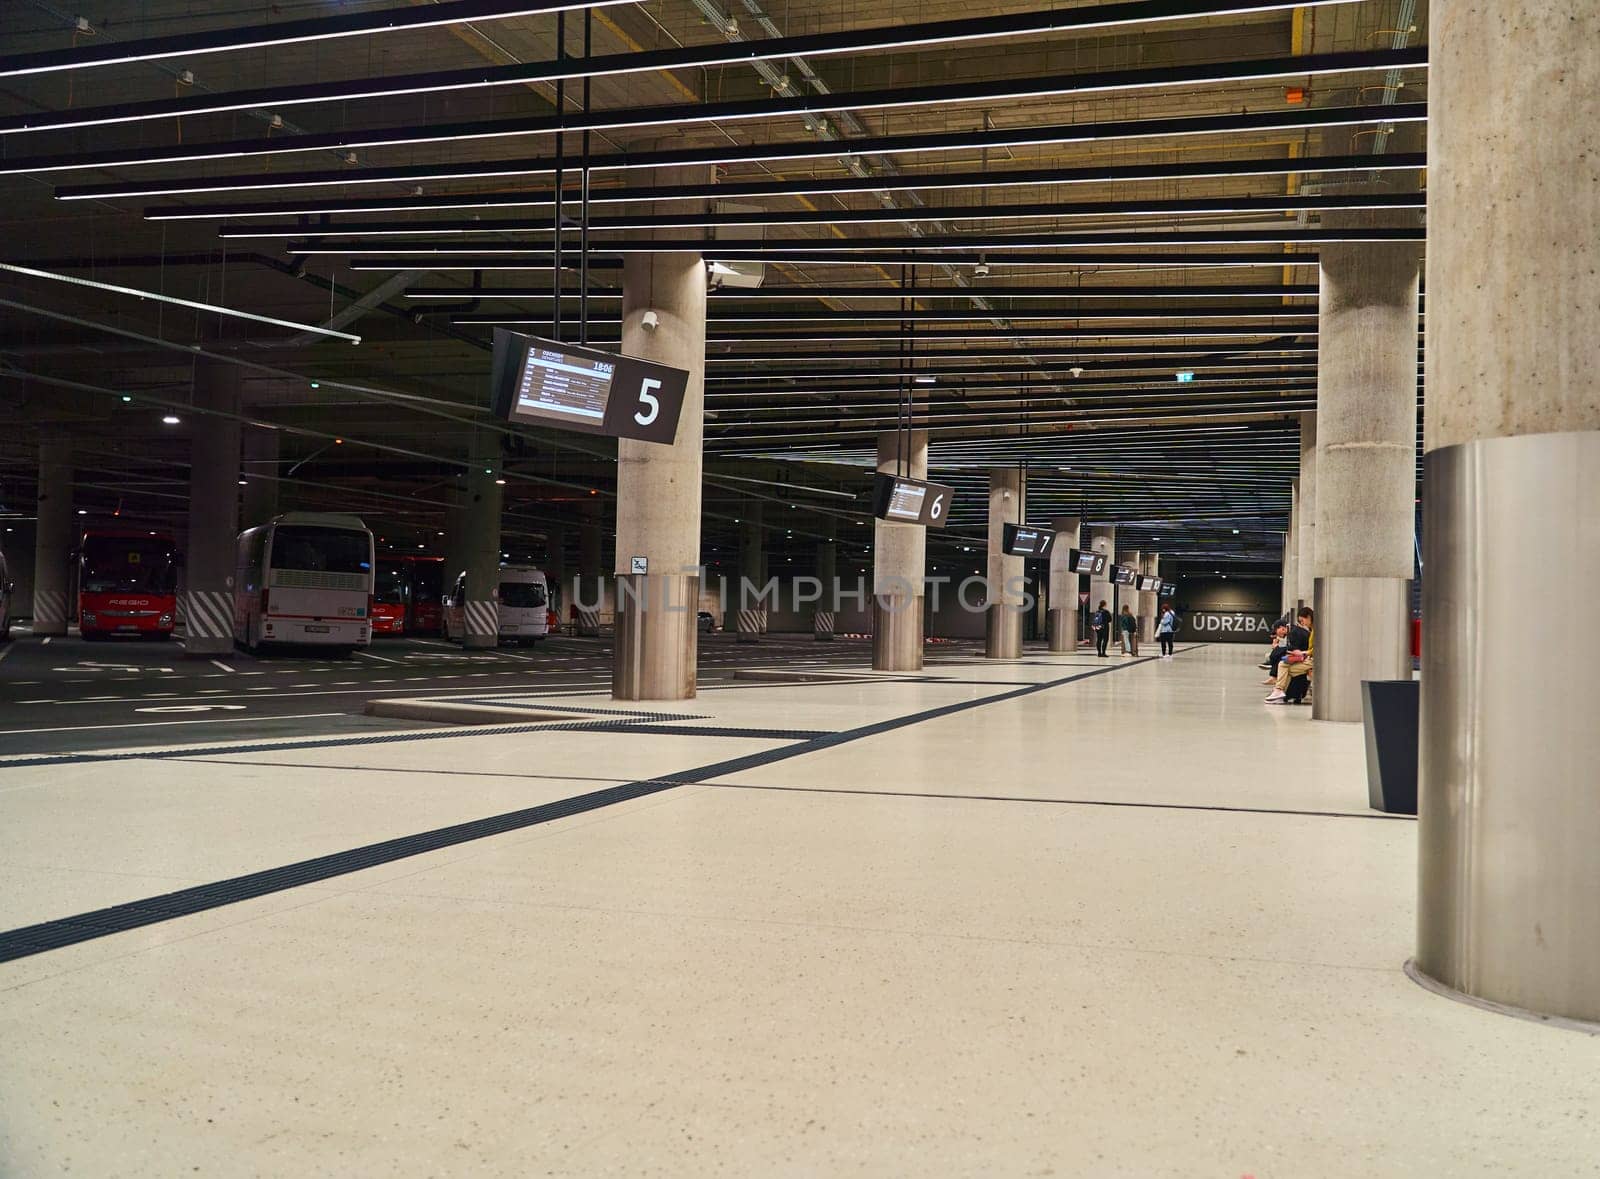 An empty bus station inside with parked buses and large columns by driver-s